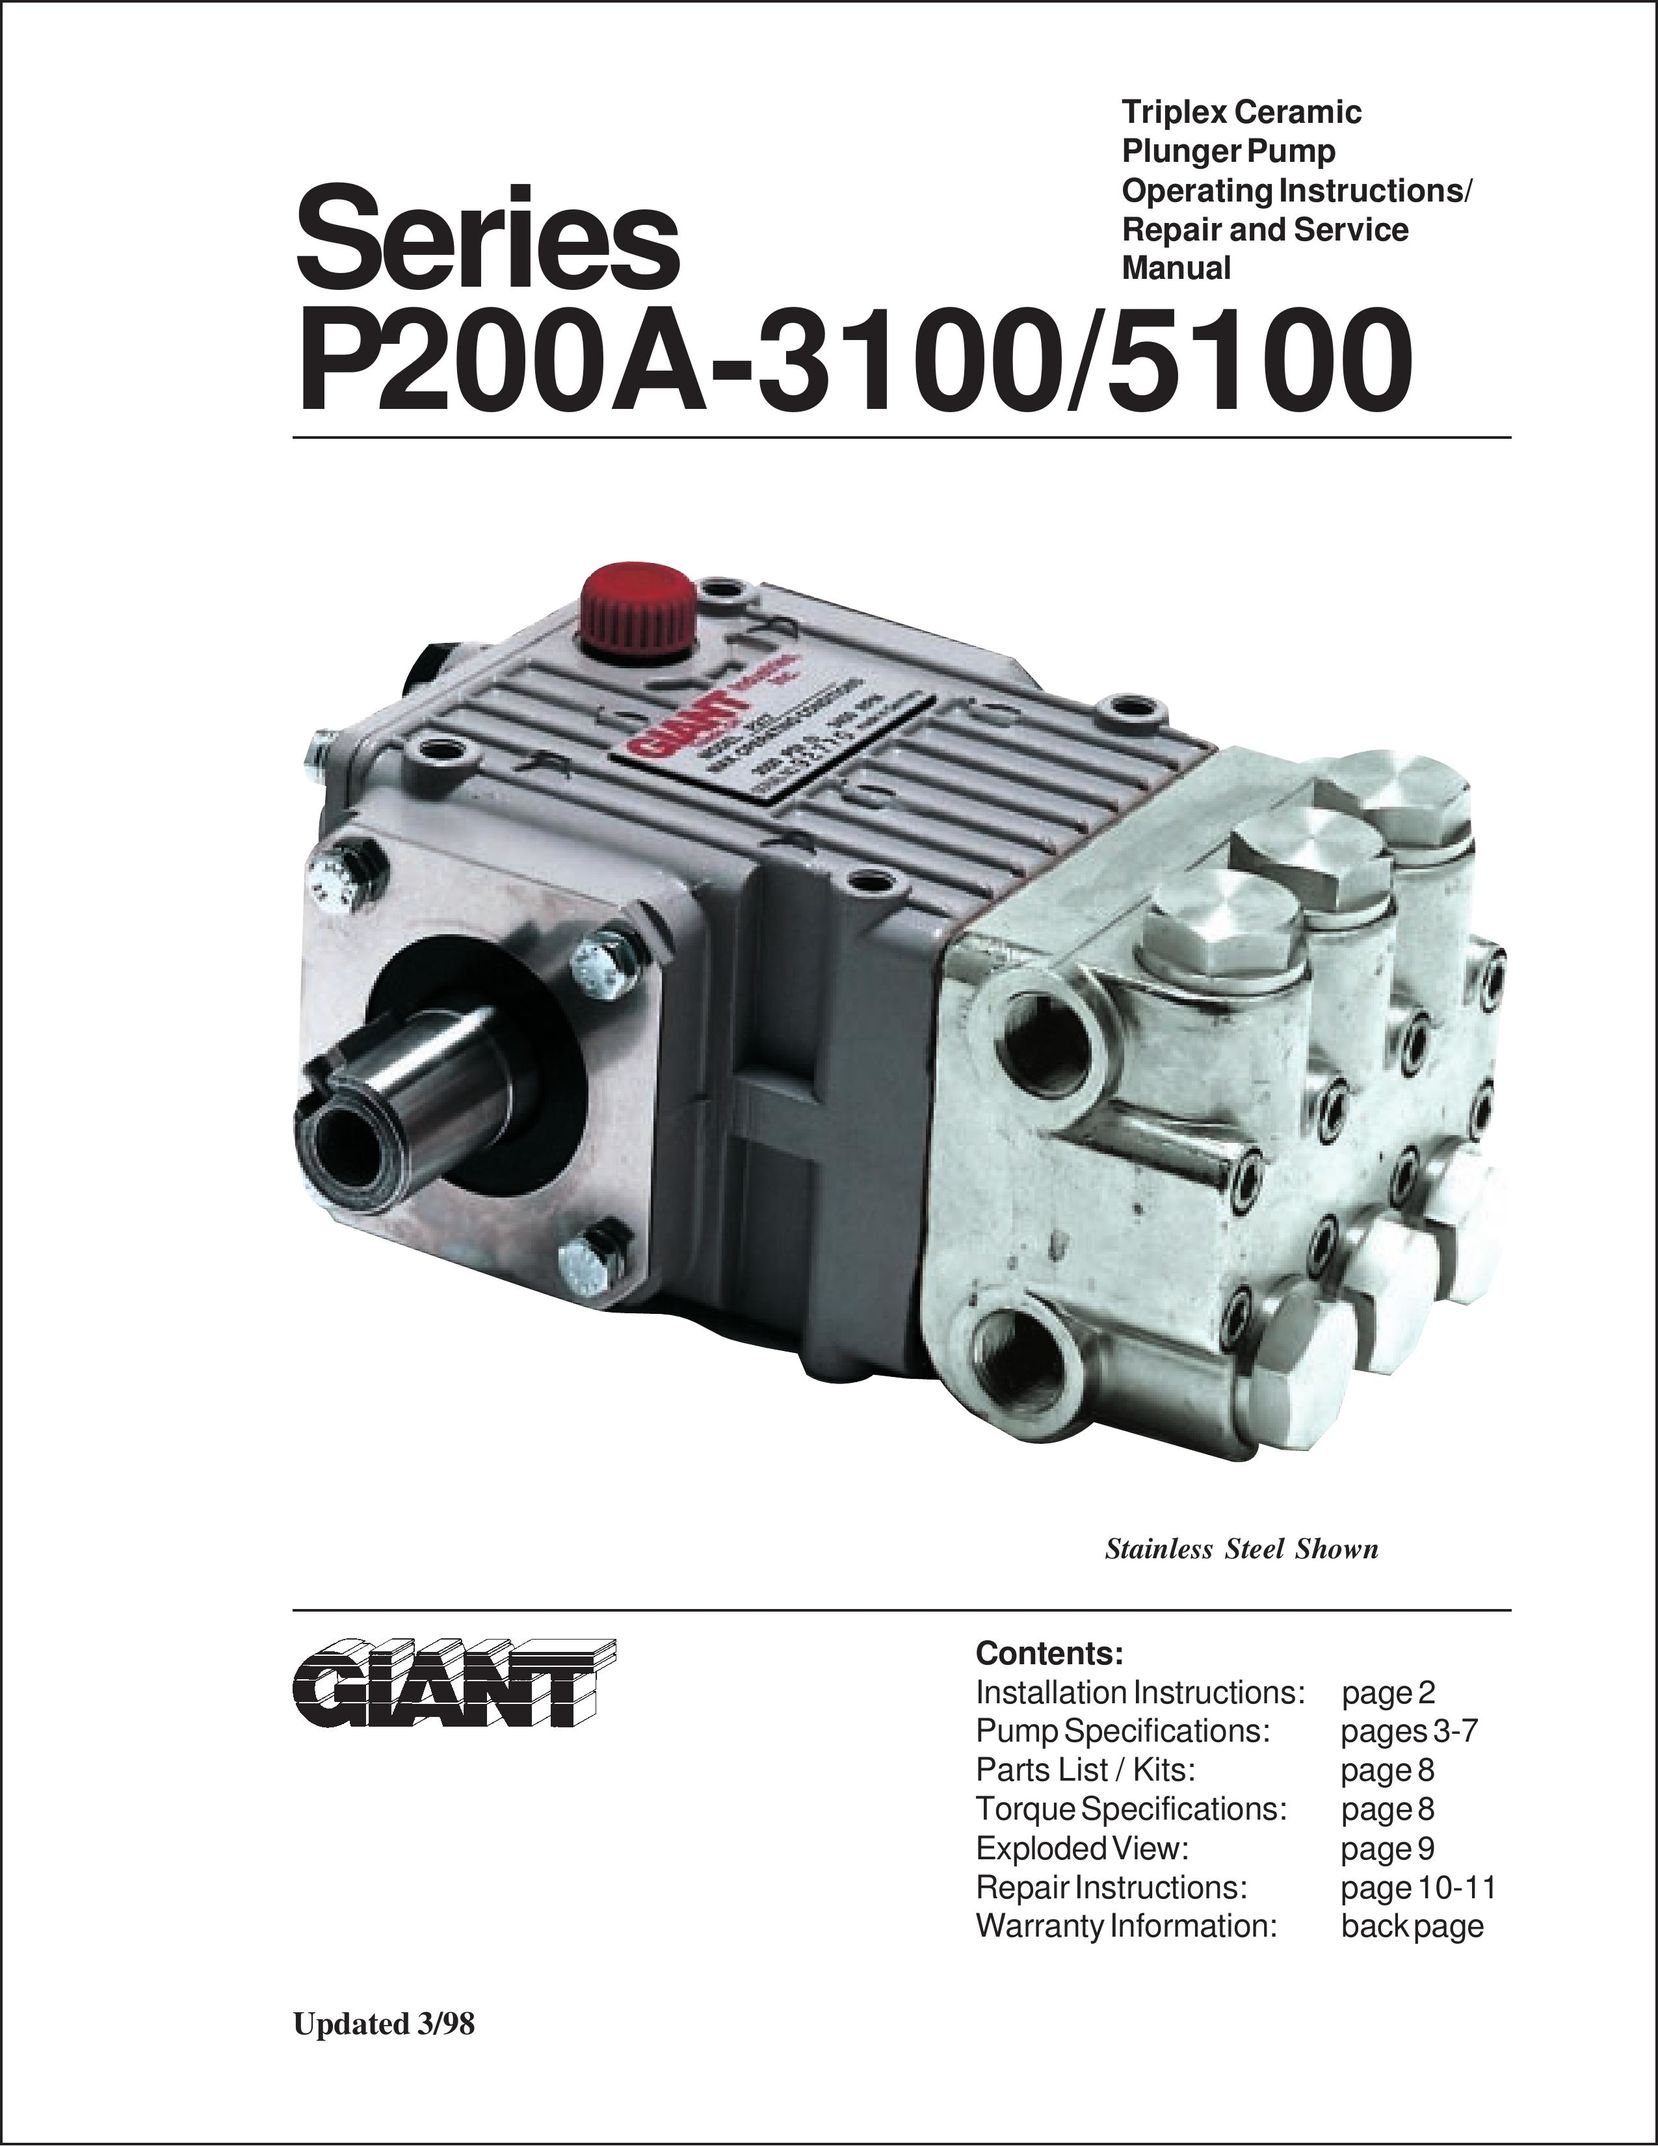 Giant P200A-3100/5100 Water Pump User Manual